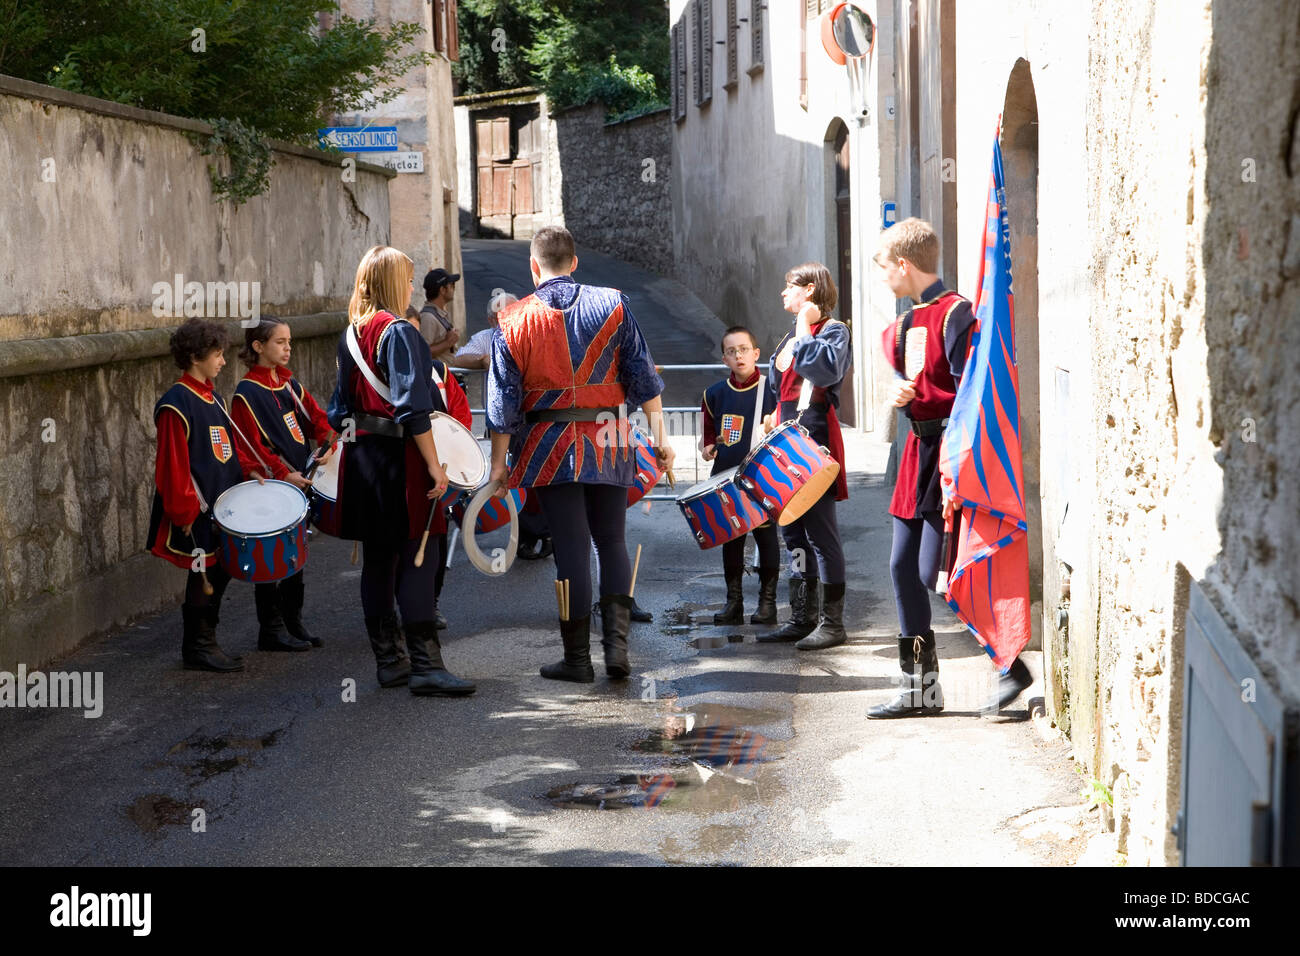 Forming the band in a side-street to march to the village center of Ameno, Italy, during the Palio, an annual summer festival Stock Photo